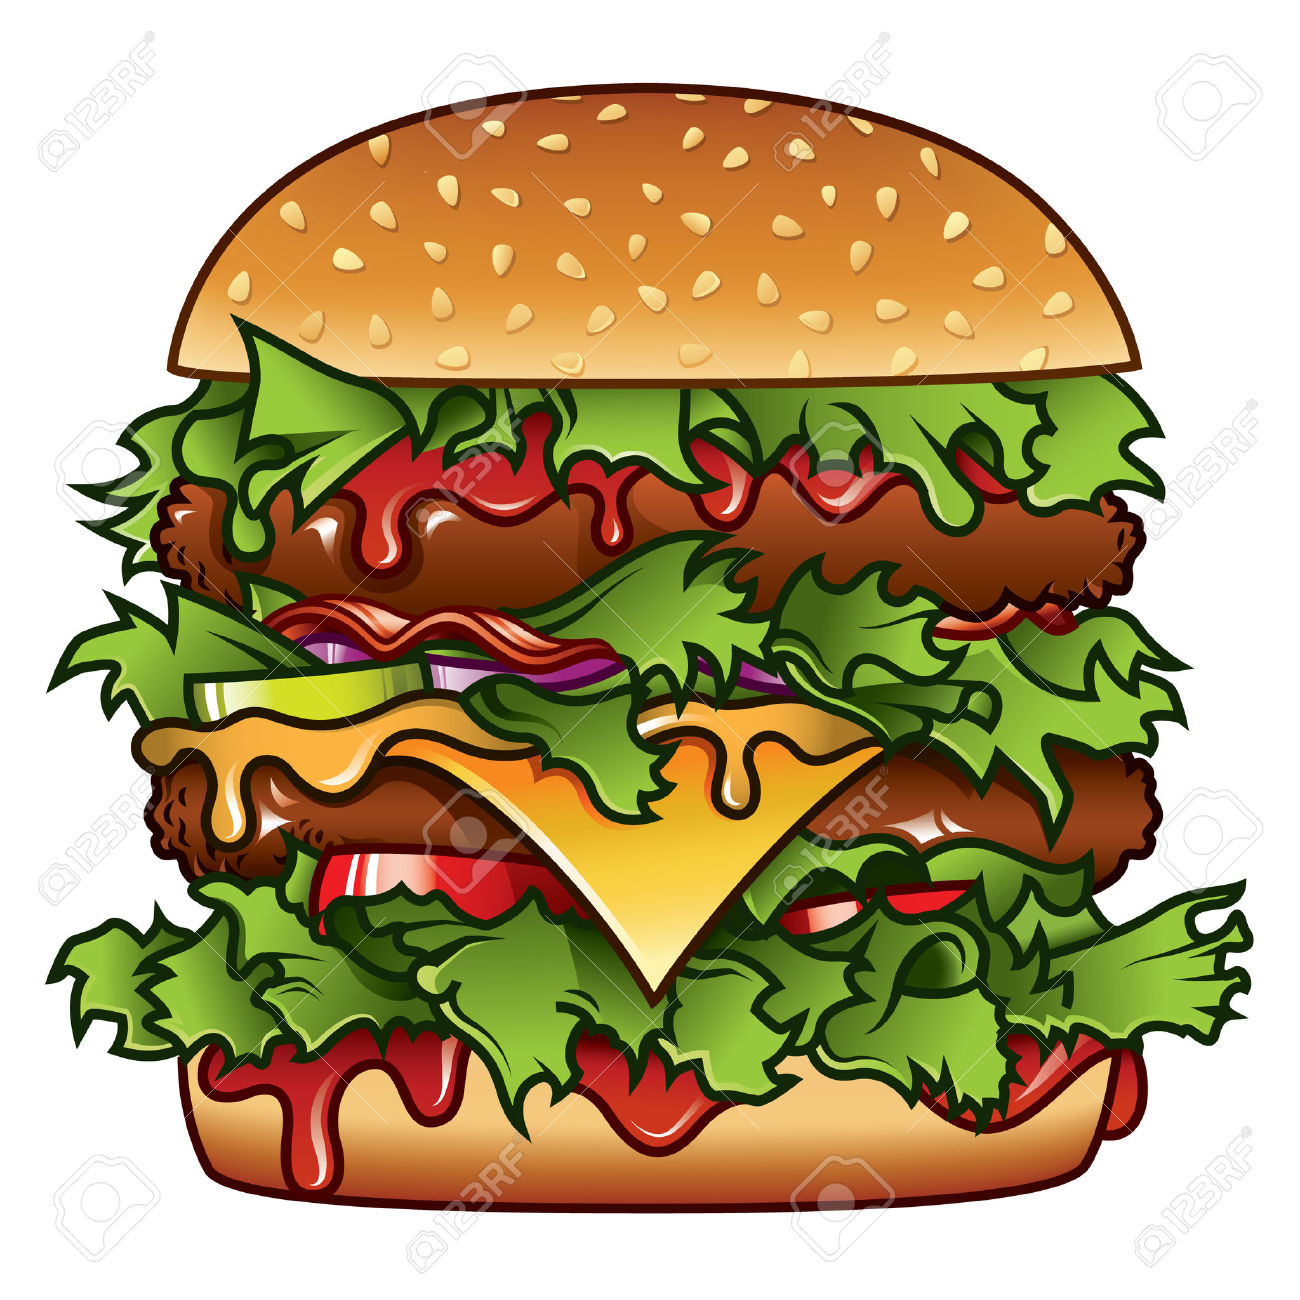 Burger Pictures